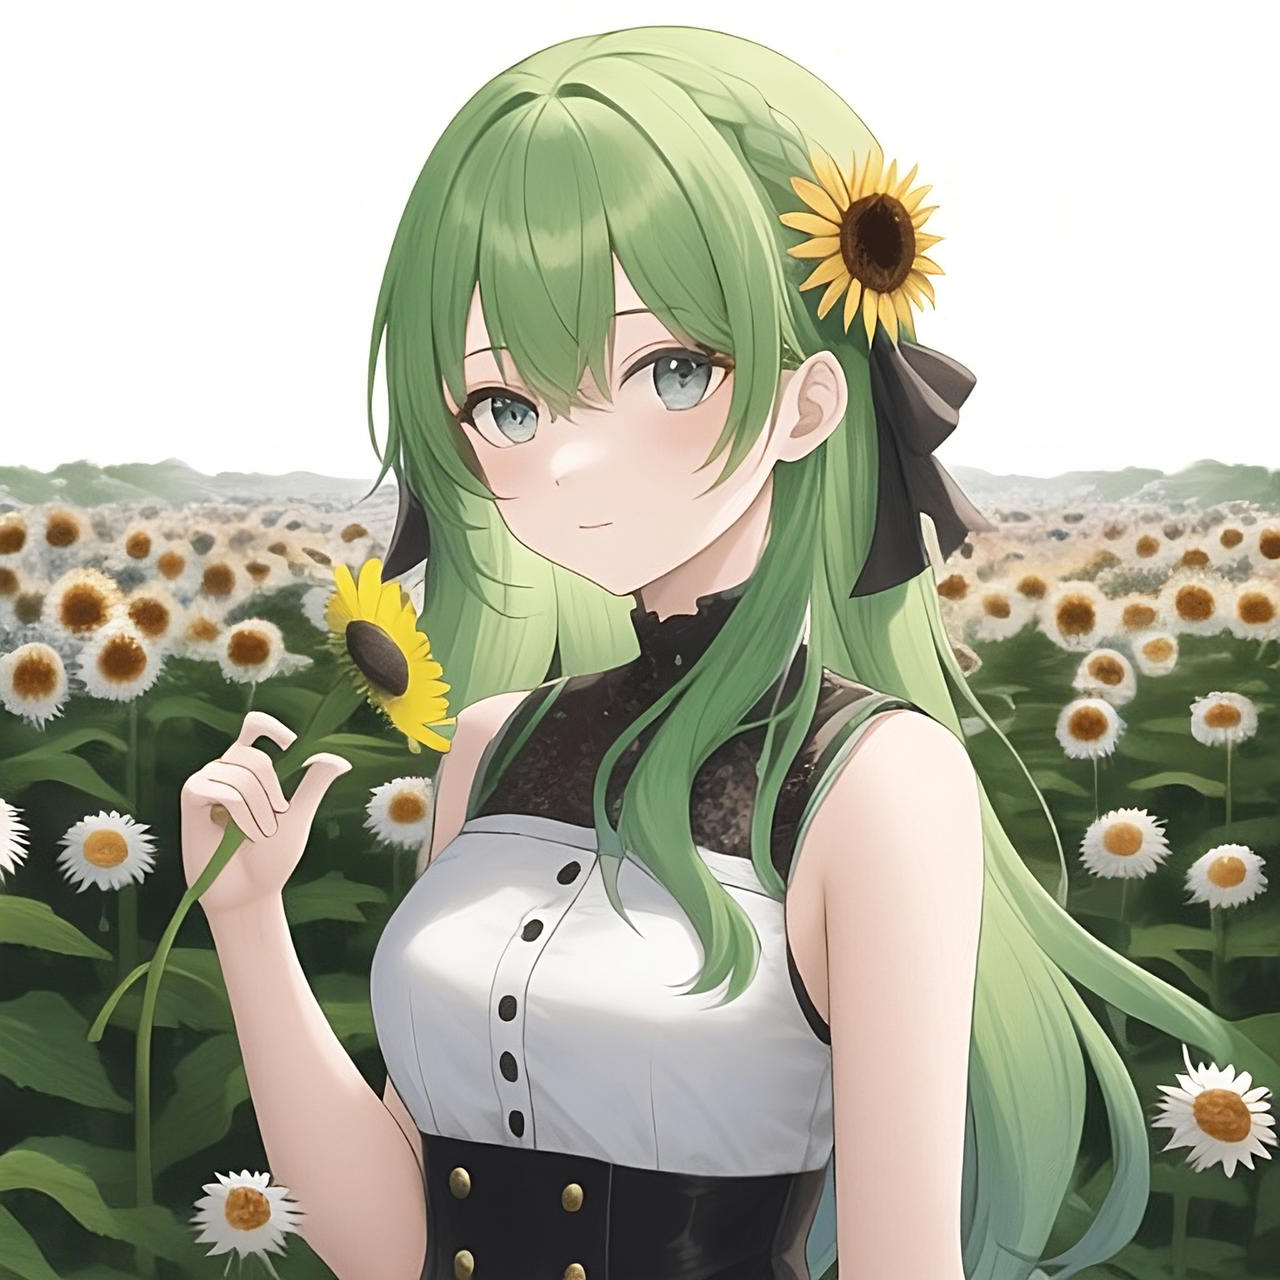 Green haired anime characters by jonatan7 on DeviantArt